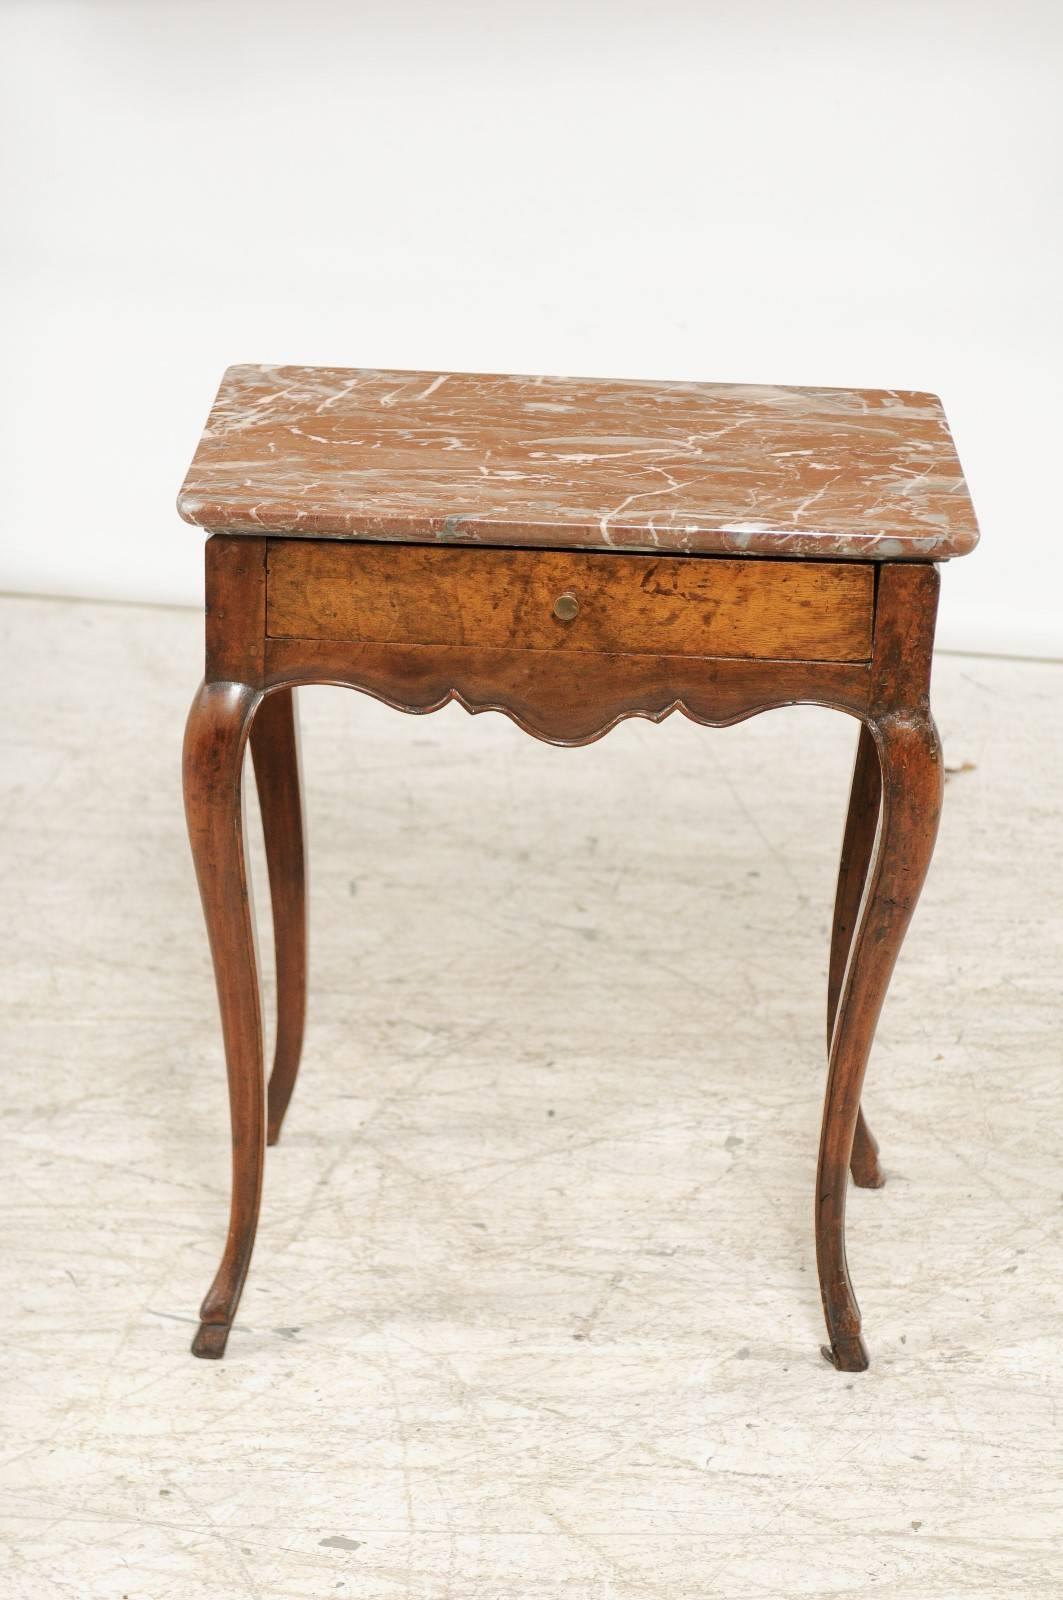 A French Louis XV style wooden side table with red variegated marble top, single drawer and cabriole legs from the late 18th century. This exquisite French Louis XV style side table features a rectangular royal red and white veined marble top over a